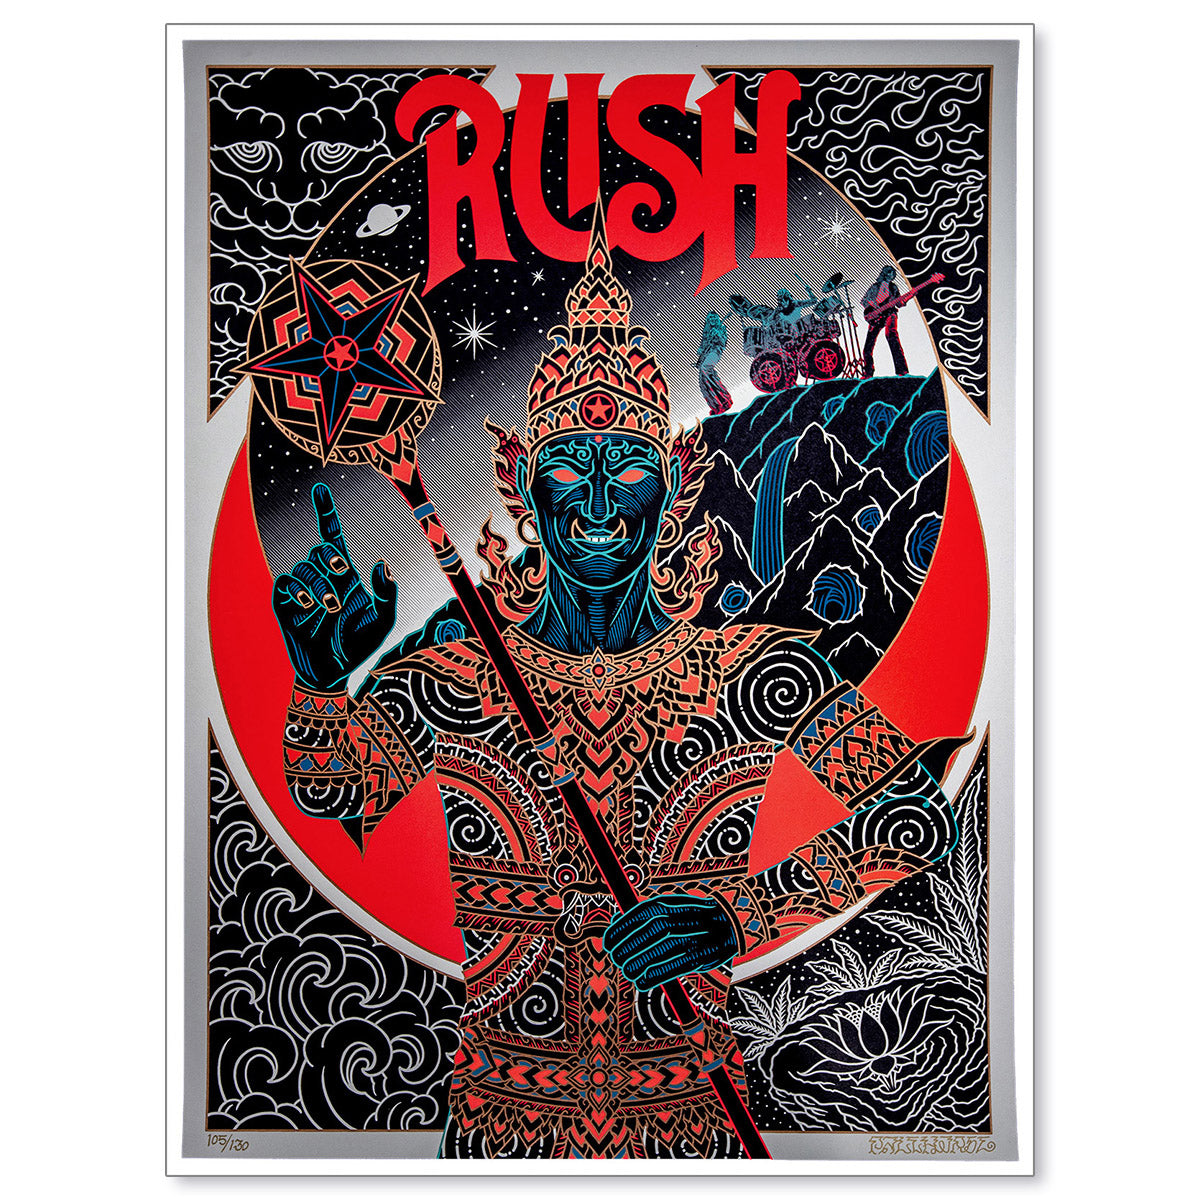 Rush - 2112: II. 'The Temples of Syrinx' by Palehorse (Main Edition)